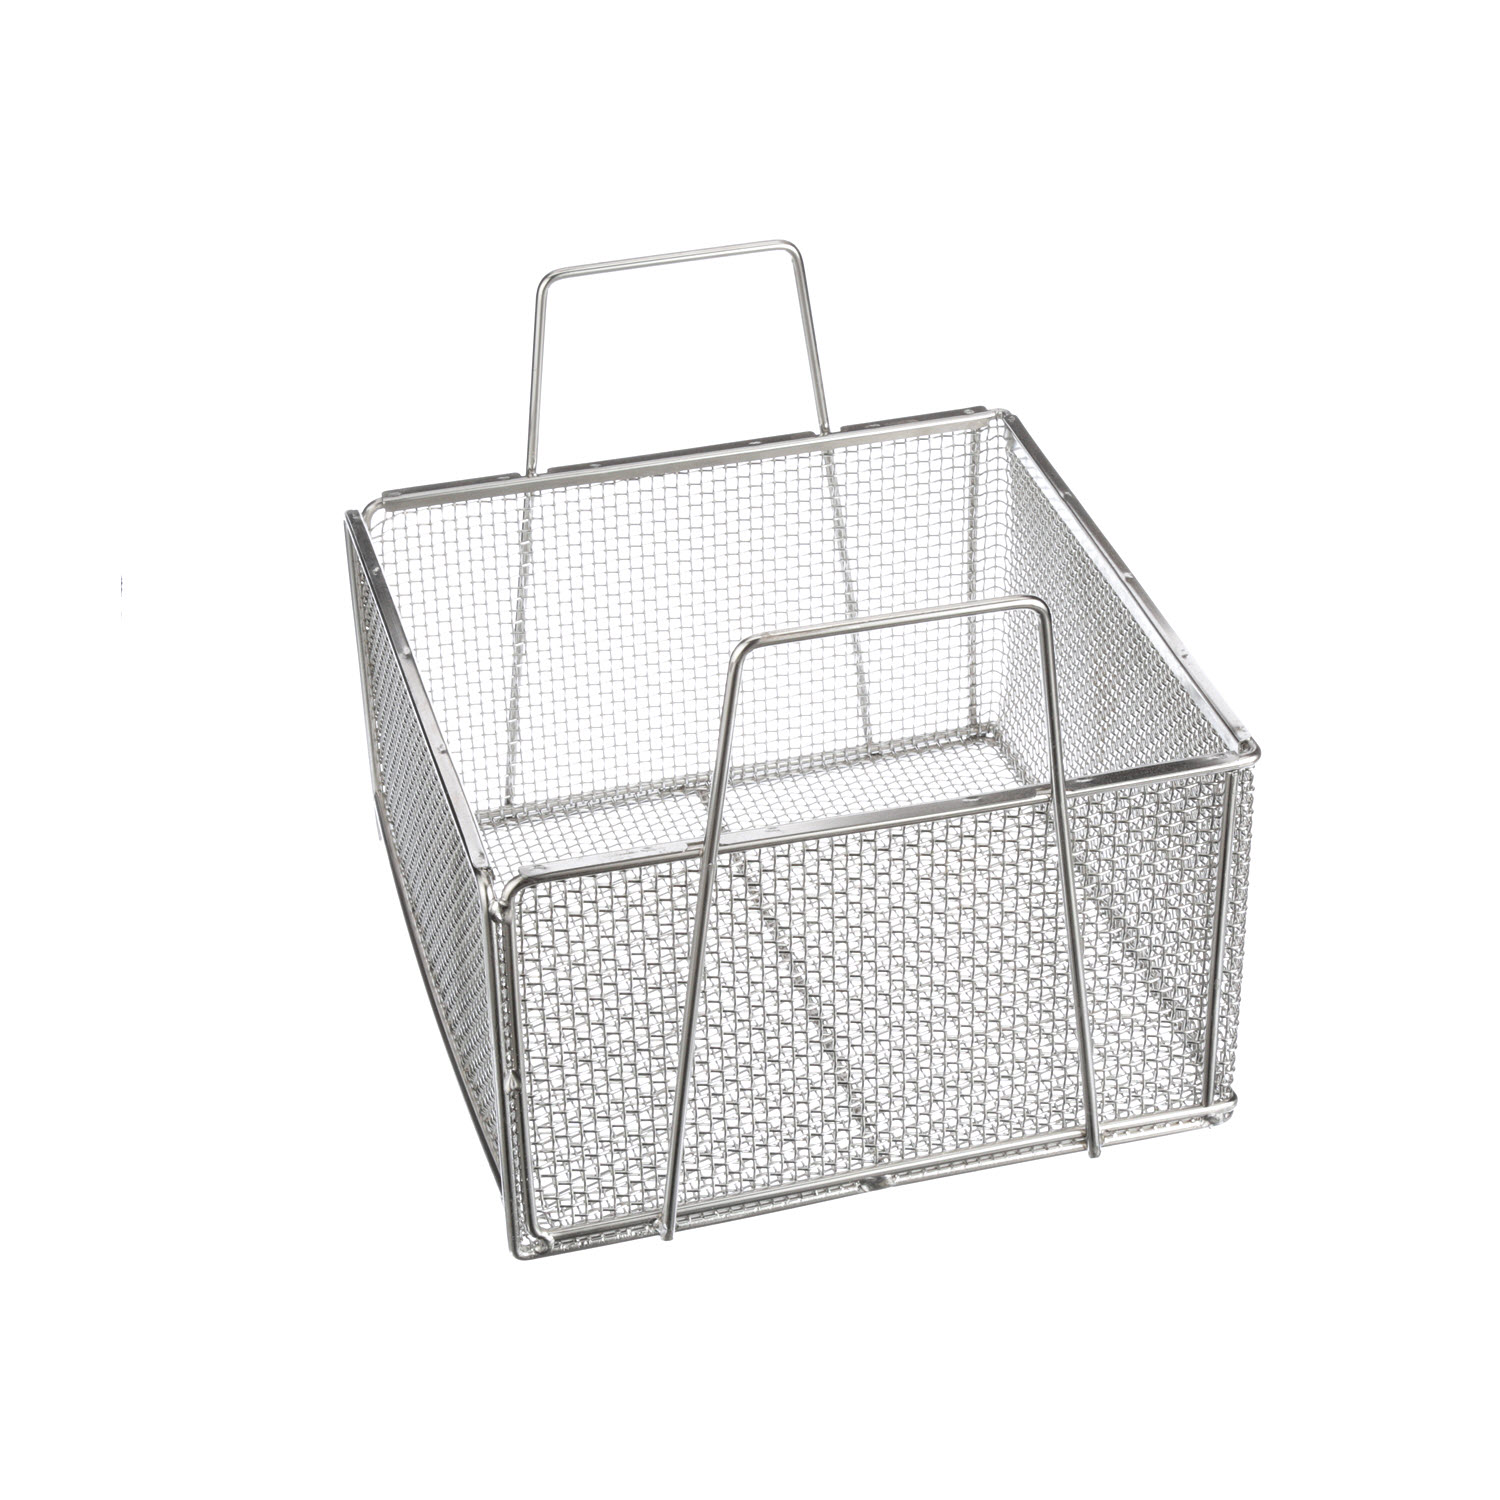 Wire Mesh or Perforated Sheet Metal, Which is Better for Your Needs?